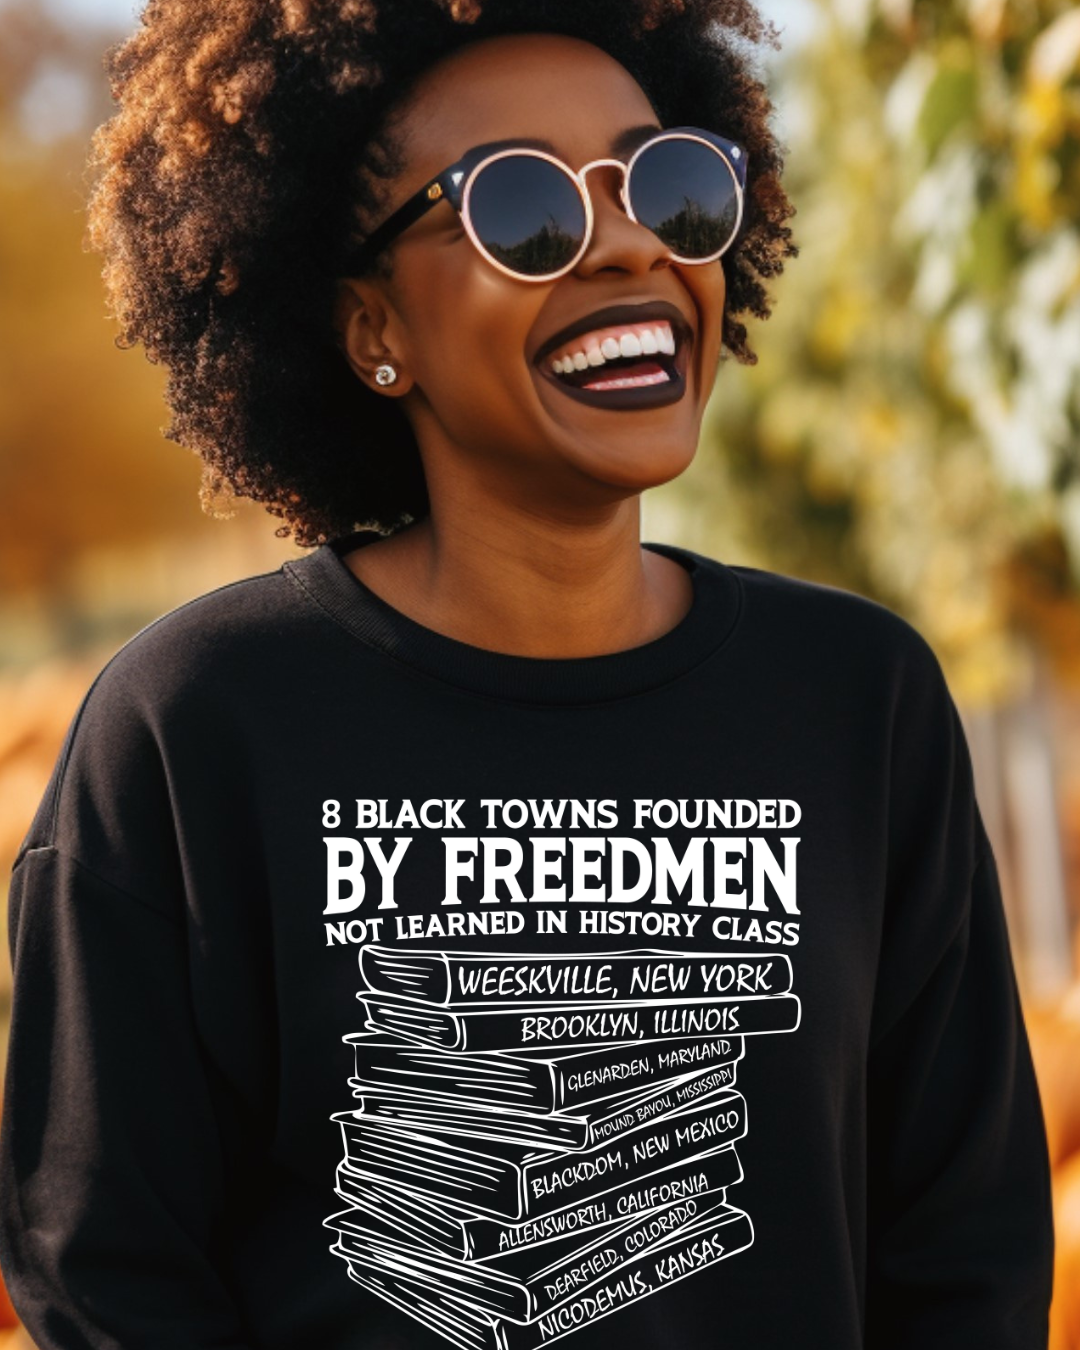 TOWNS FOUNDED BY BLACK FREEDMEN DESIGNS